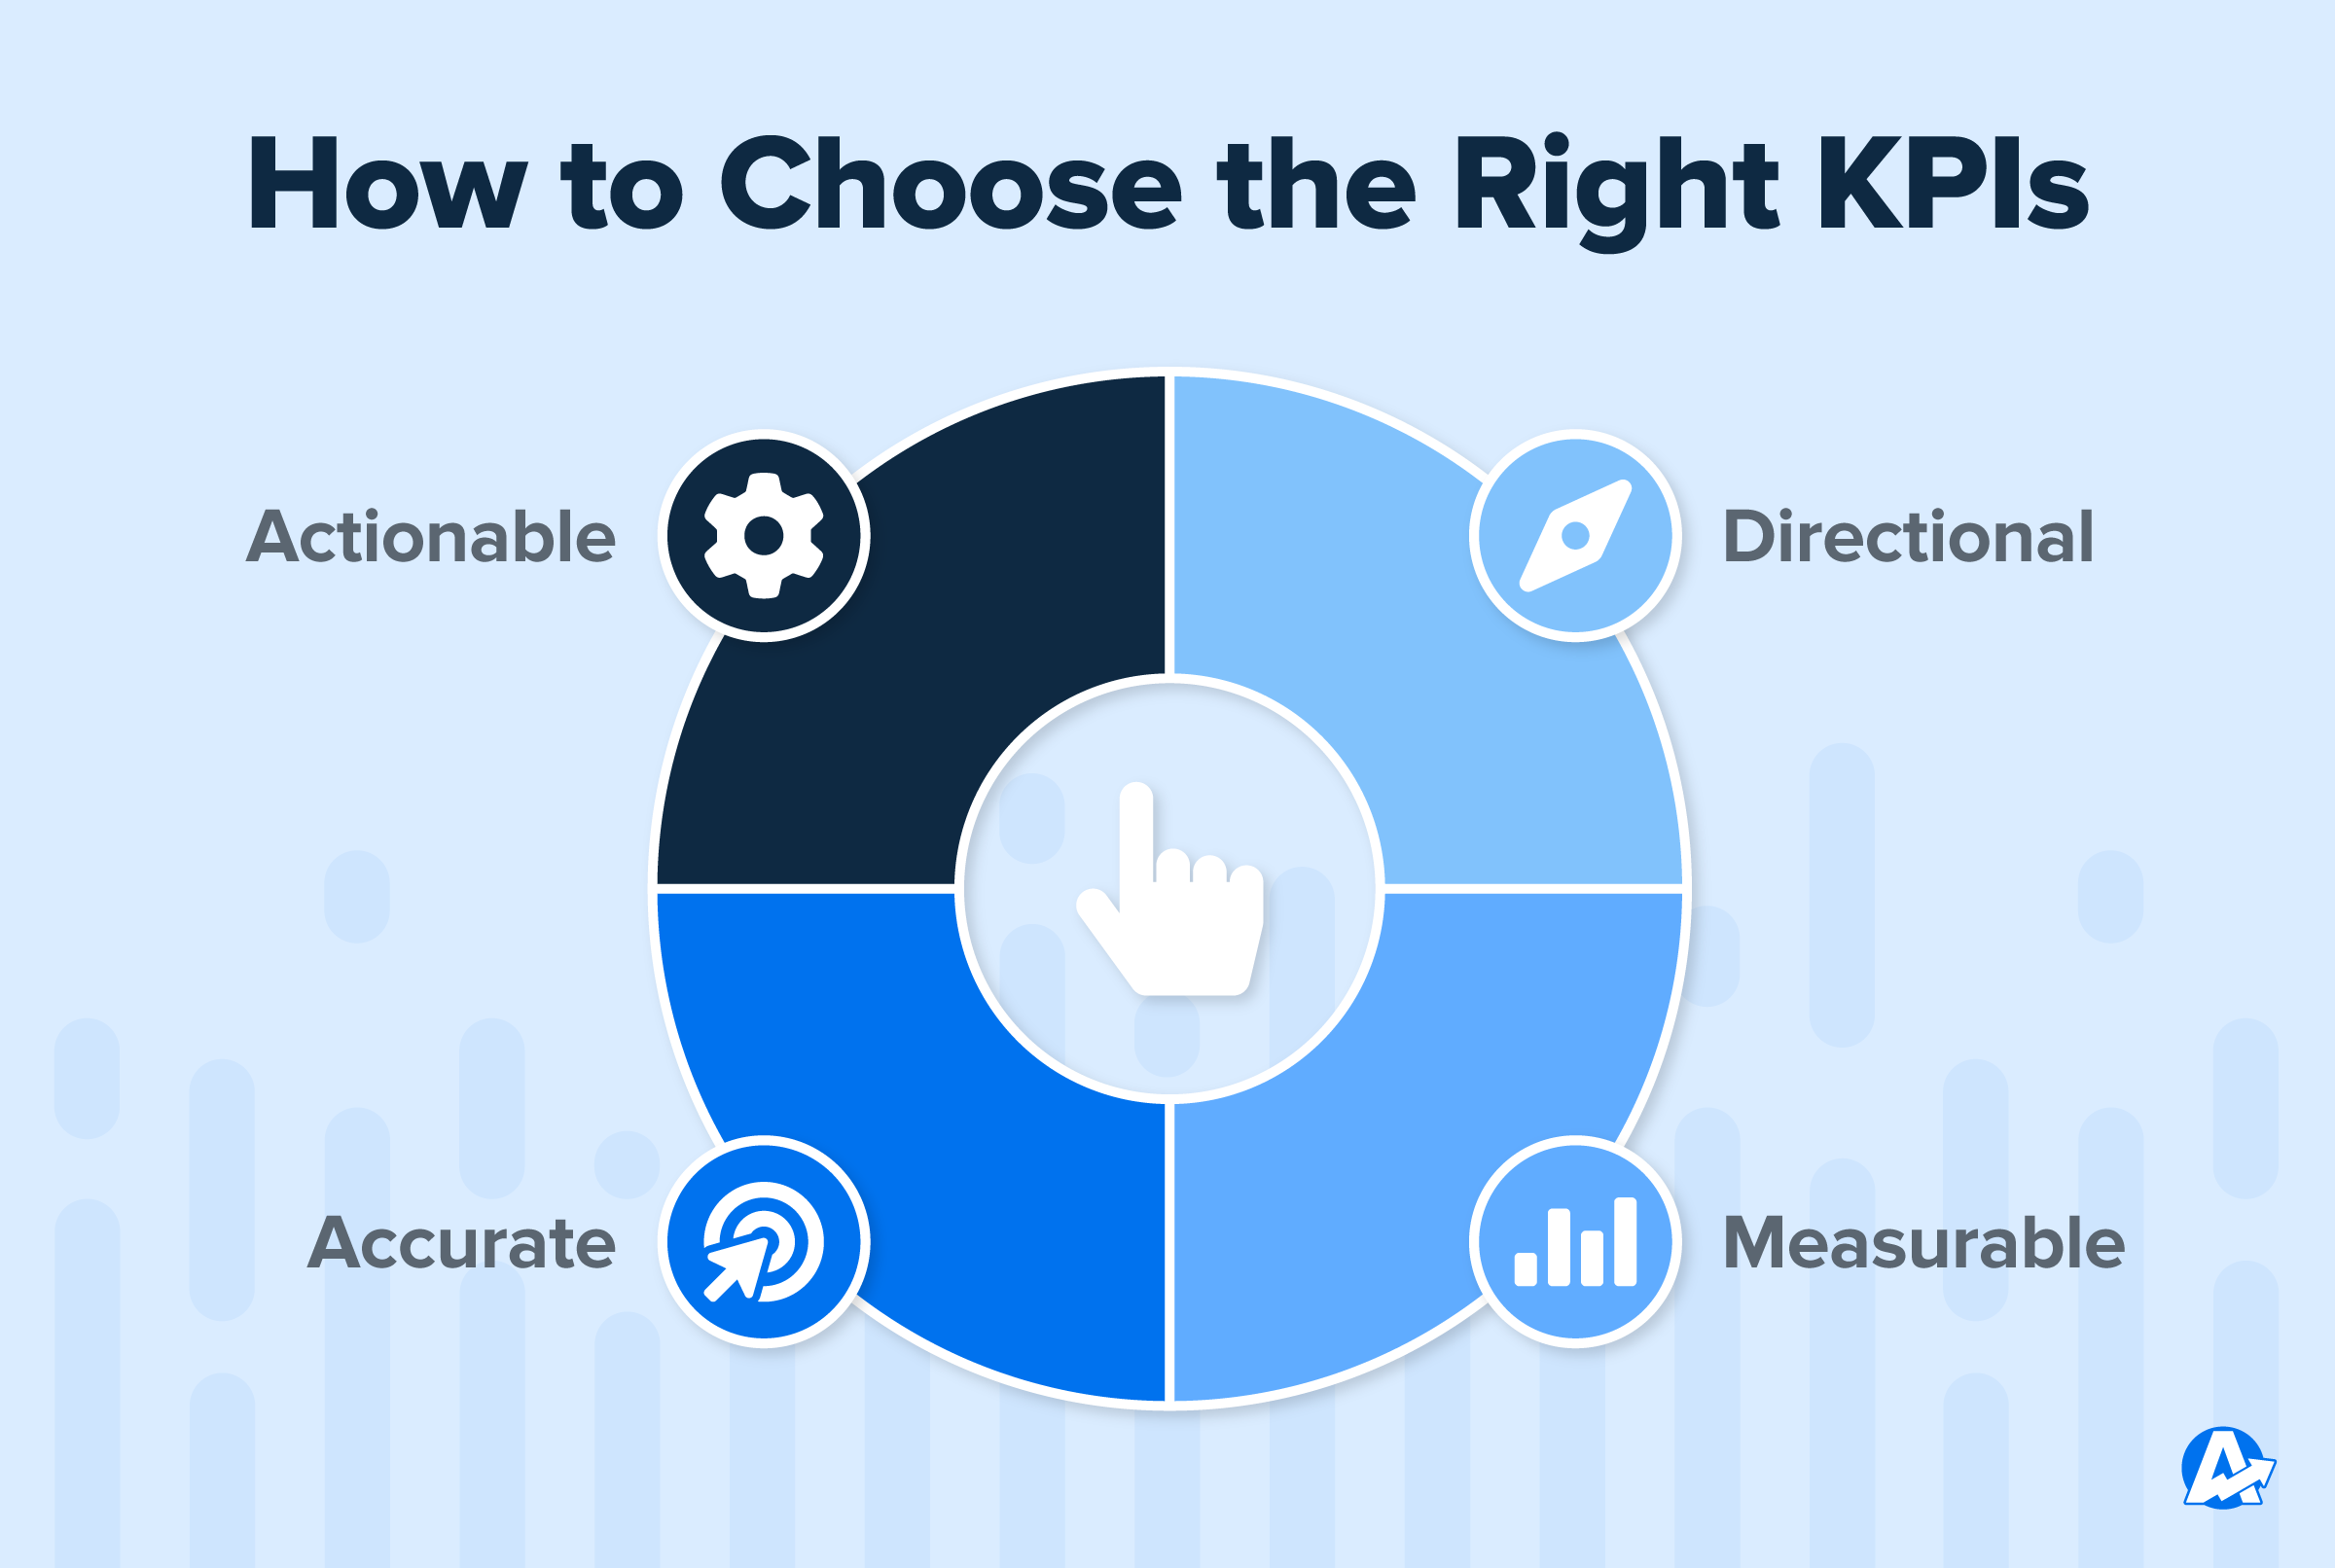 Measuring Success: KPIs and Metrics for Website Redesign
